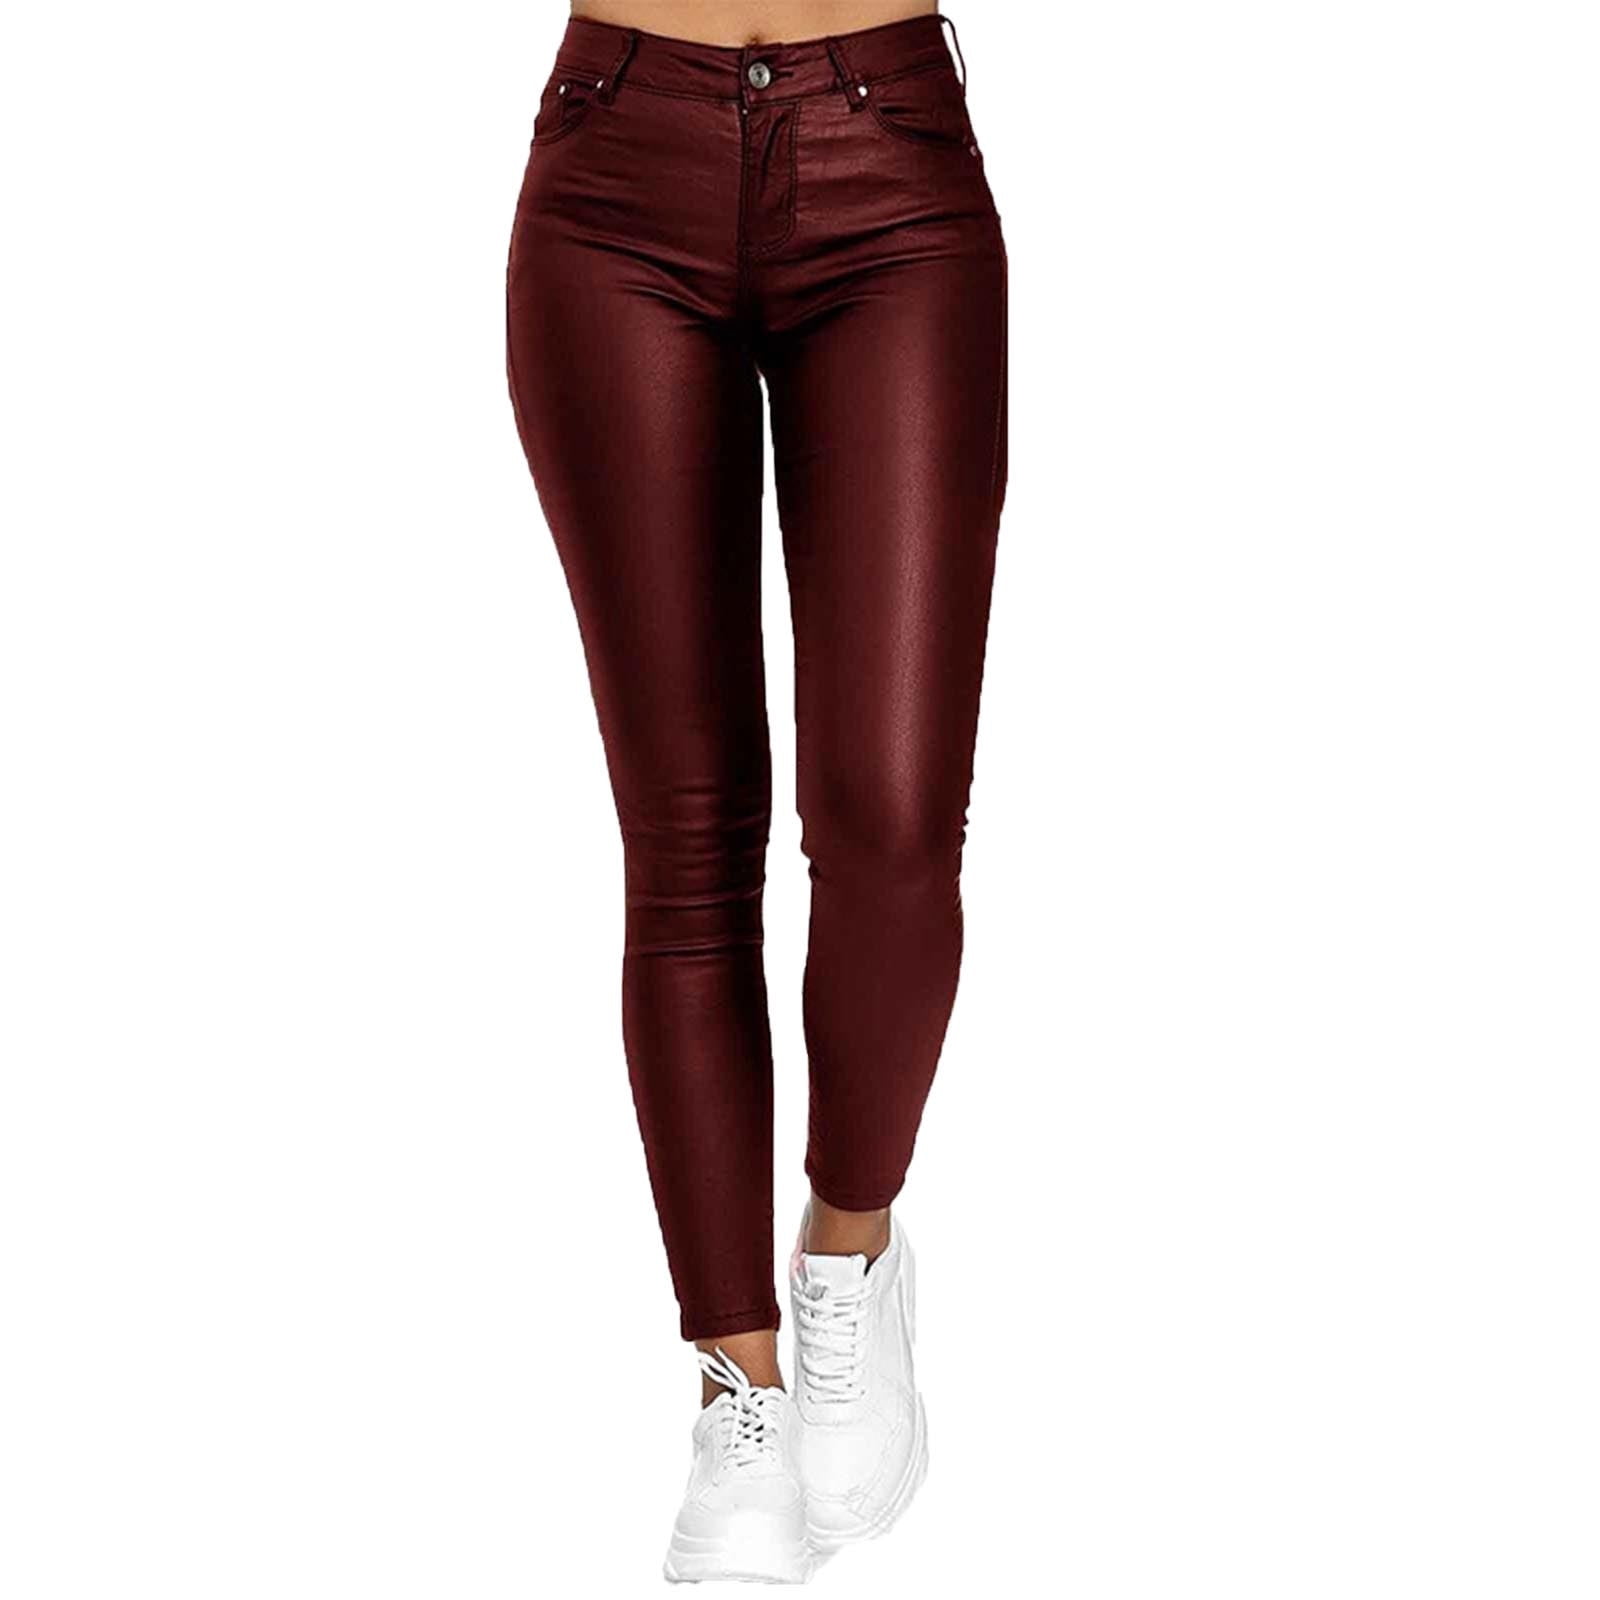 Faux Leather Leggings for Women, Fashion Stretch High Waist Pants Sexy  Skinny Solid Color Tights Ladies Pocket Trouser Black 